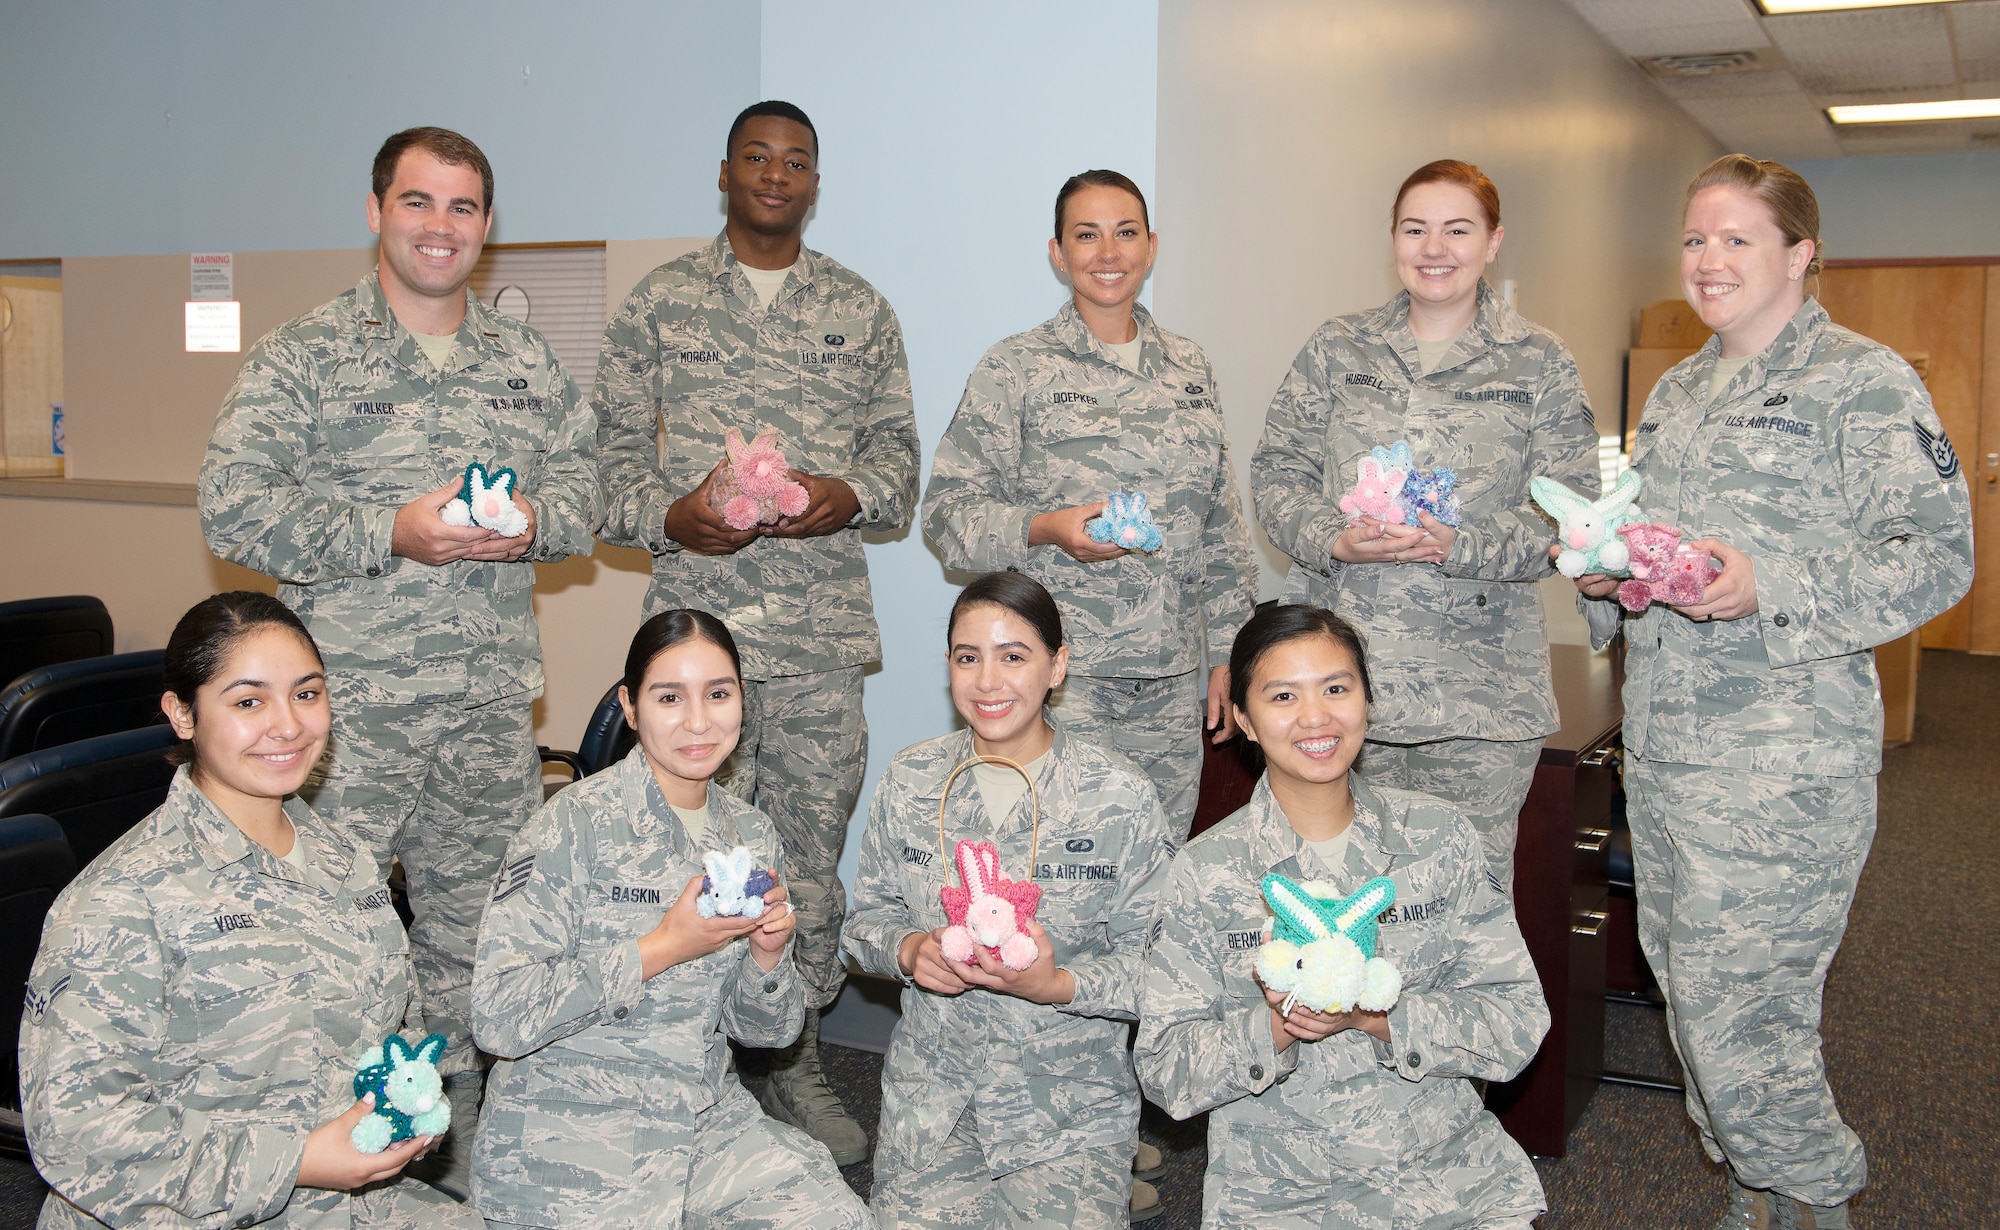 Members of 55th Comptroller Squadron Financial Management flight pose with crocheted rabbits made by Sally Harder July 1, 2019, at Offutt Air Force Base, Nebraska. Harder, a retired military spouse and grandmother to Airman 1st Class Julie Hubble, financial services technician enjoys crafting for others.  “I’ve been making things for people all of my life it’s just little things to brighten up their desk,” said Harder.